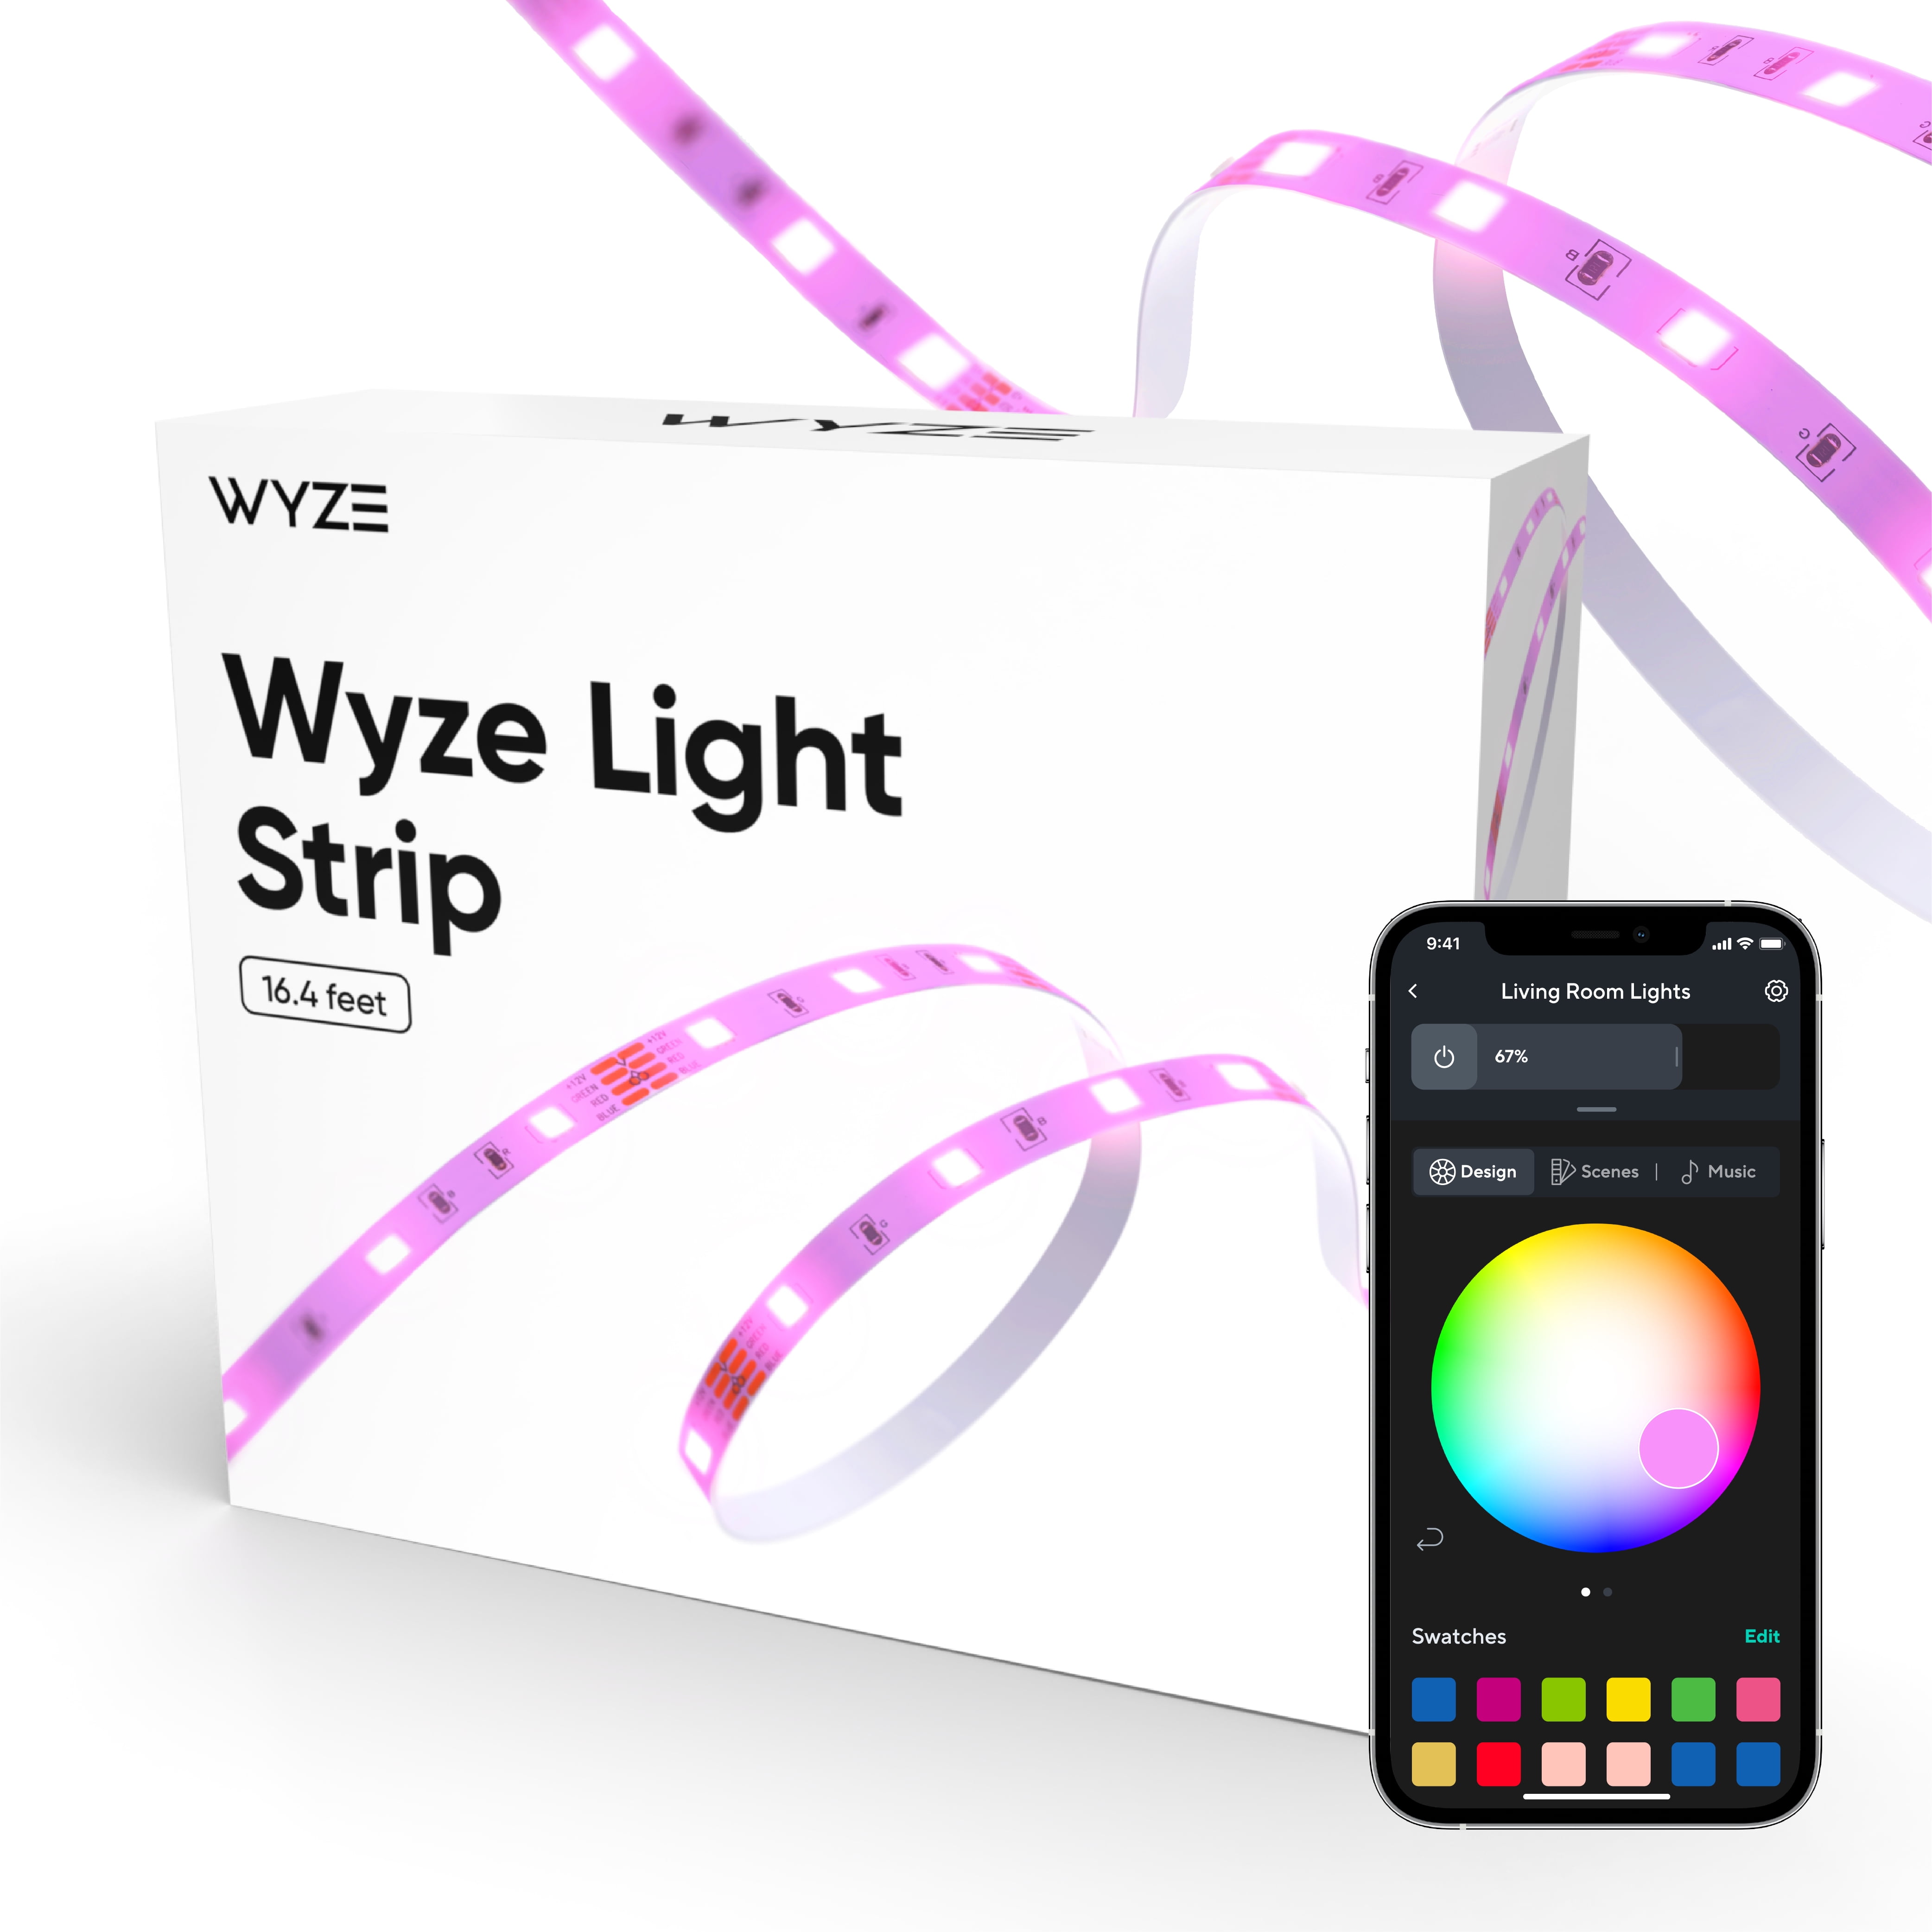 Wyze Light Strip, 16.4ft WiFi LED Light Strip, 16 Million Colors RGB with App Control and Sync to Music